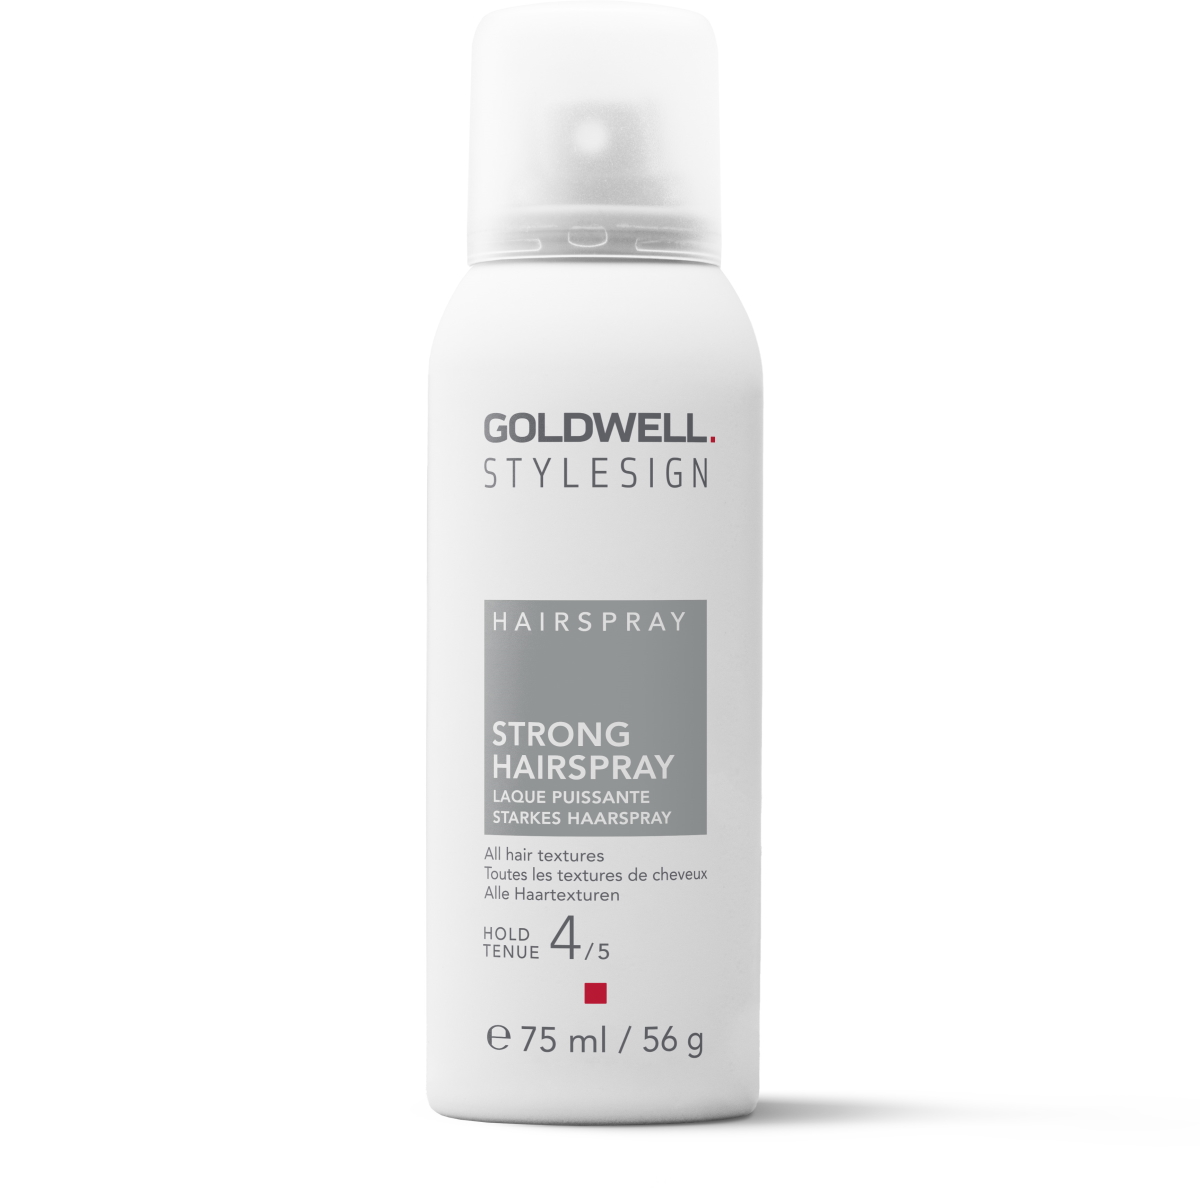 Goldwell Style Sign Hairspray Strong Hairspray 75ml